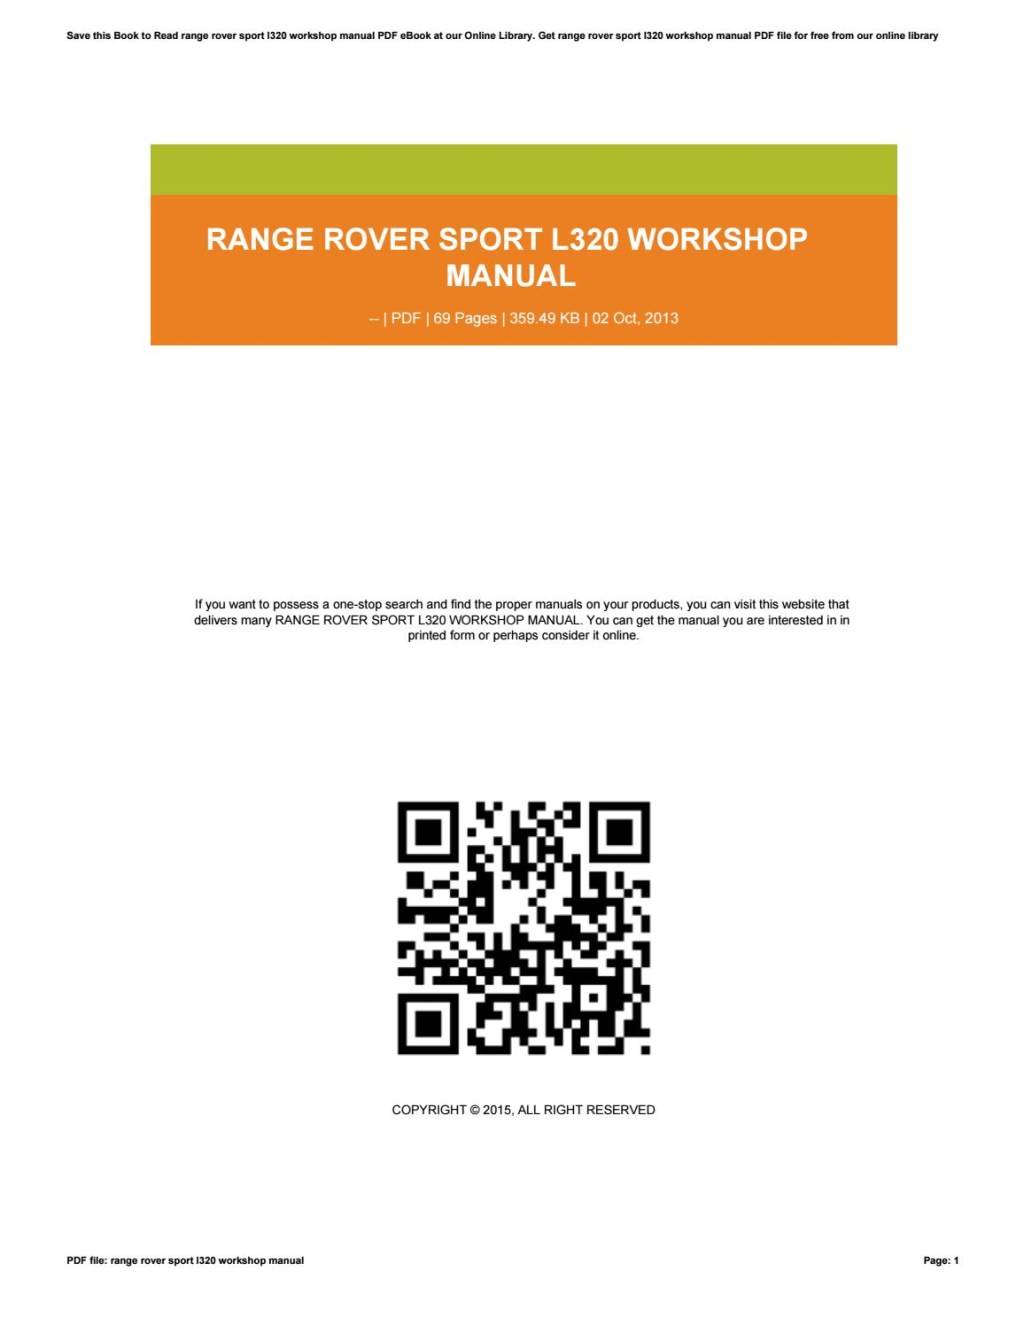 Picture of: Range rover sport l workshop manual by glubex – Issuu